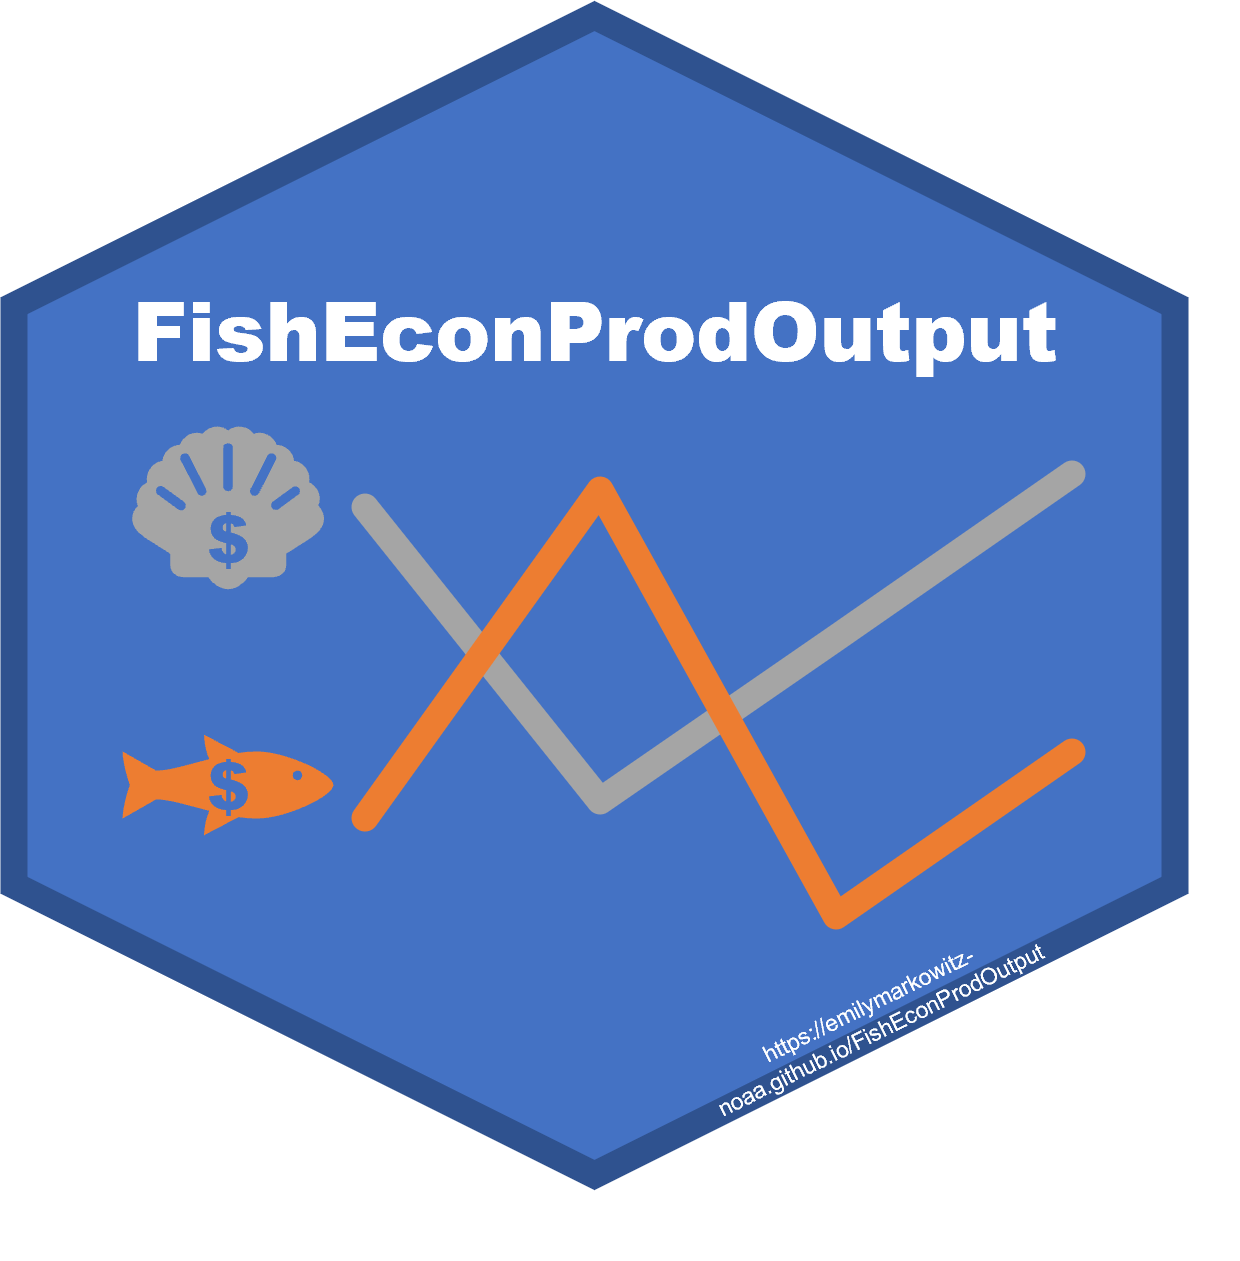 logo with a plot of economic productivity for fish and inverts.